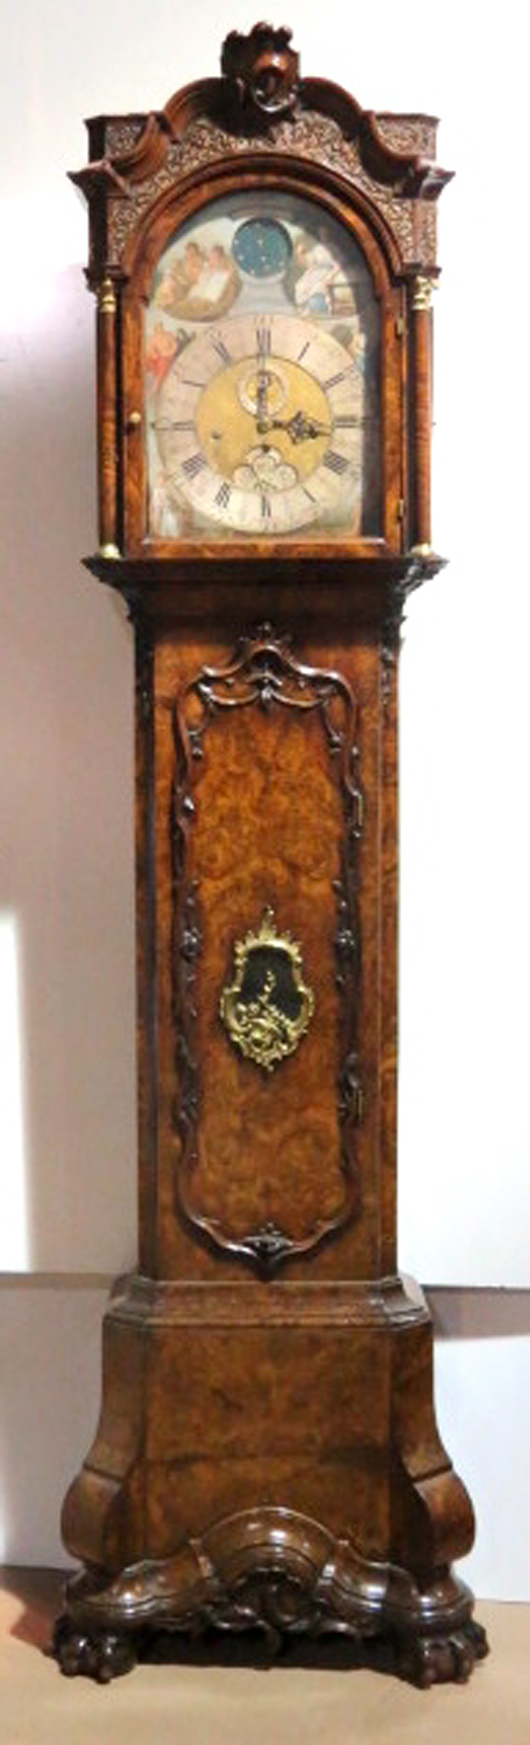 Eighteenth century Dutch burl walnut tall case clock, marked Gerrit Knip & Zoon of Amsterdam, 102 inches tall. Price realized: $15,600. S & S Auction Inc. image.